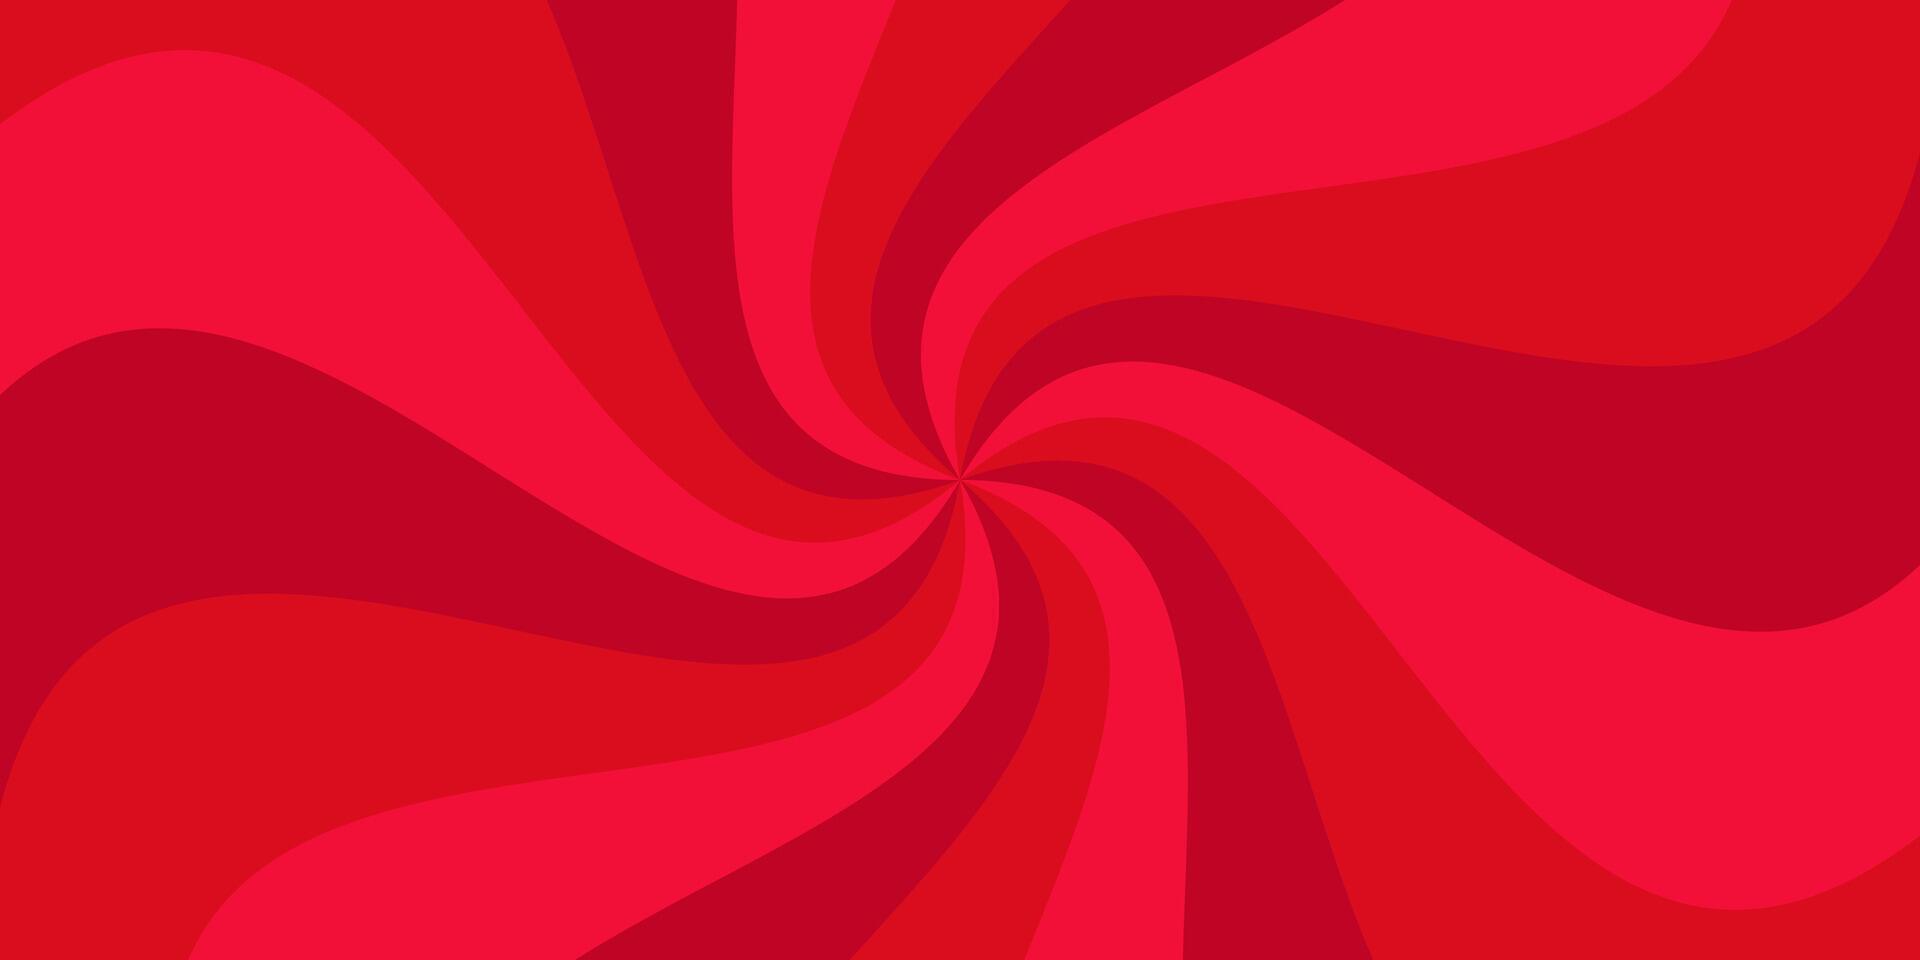 red abstract background with waves. free copy space area. vector design for banner, greeting card, poster, cover, web, social media.